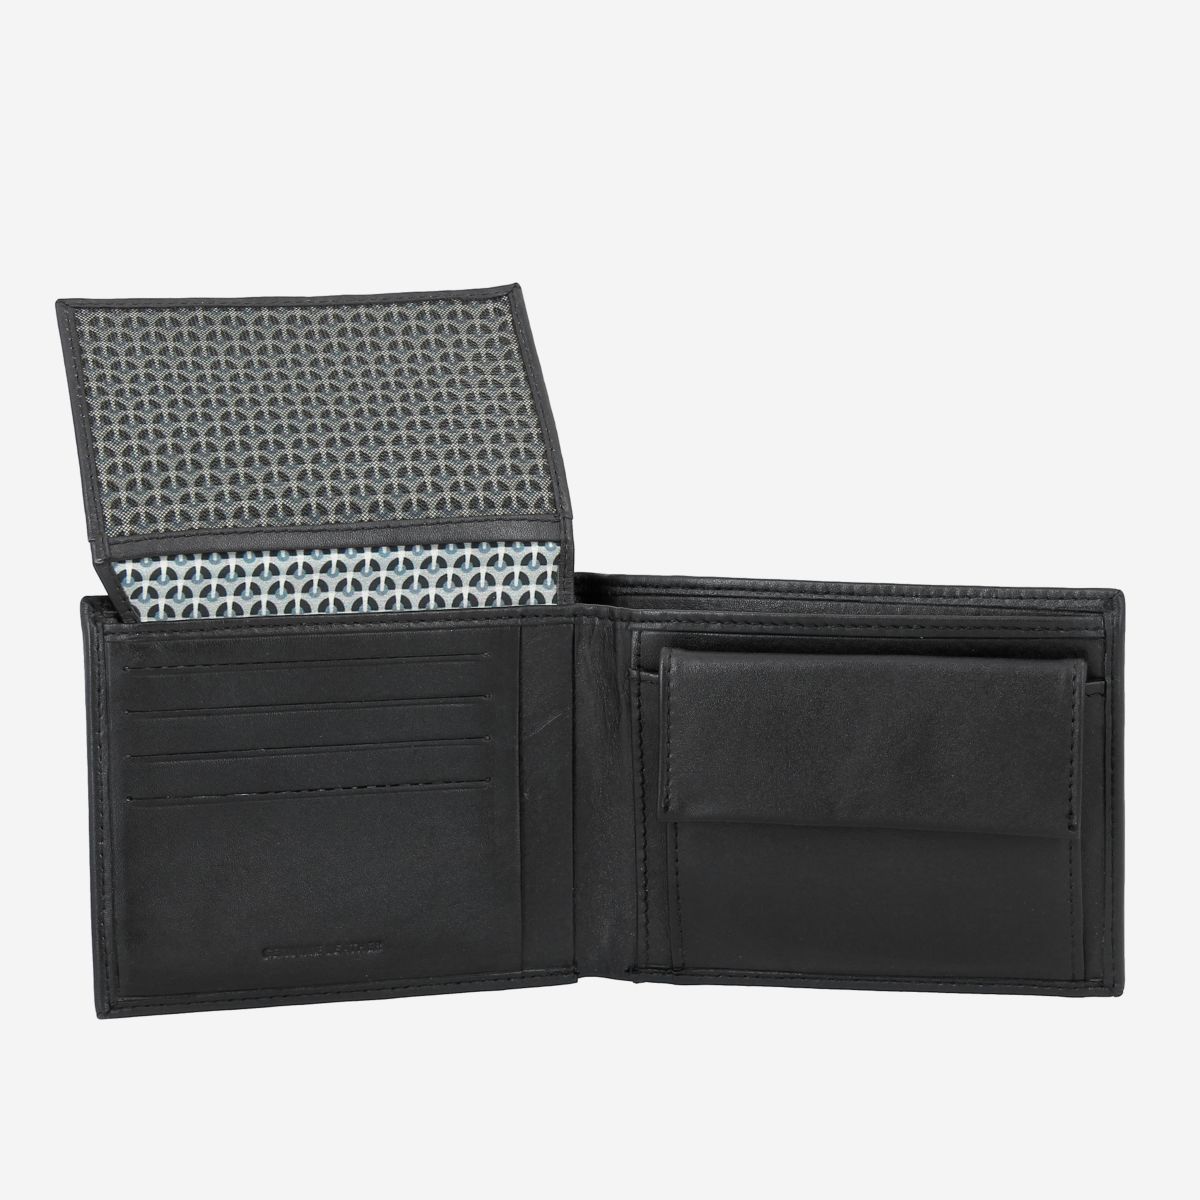 NUVOLA PELLE Elegant Mens Leather Wallet With Coin Coin Purse - Black